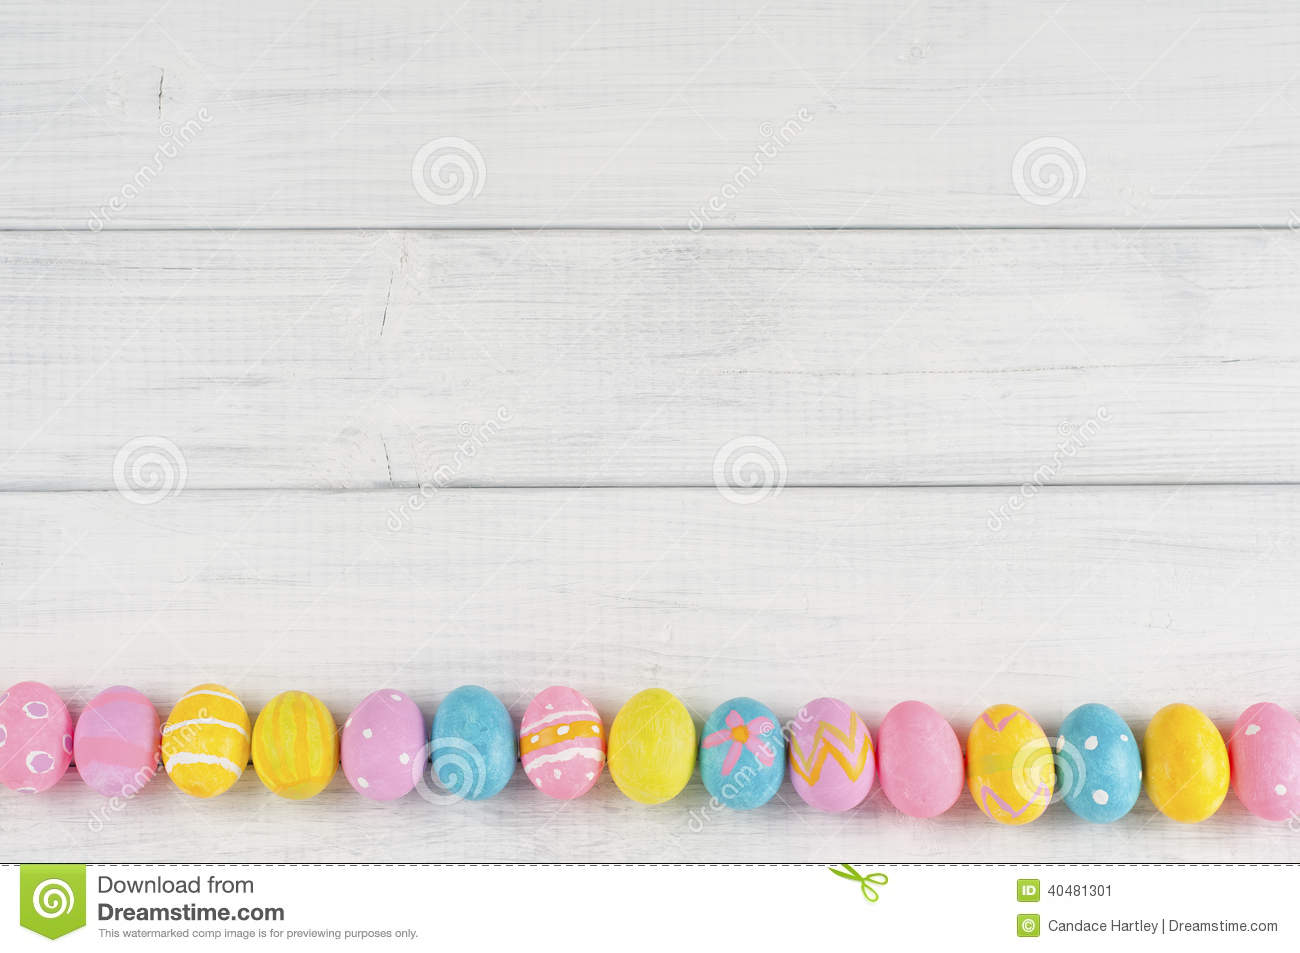 Horizontal Works As A Vertical Line Of Colorful Easter Eggs On Lower